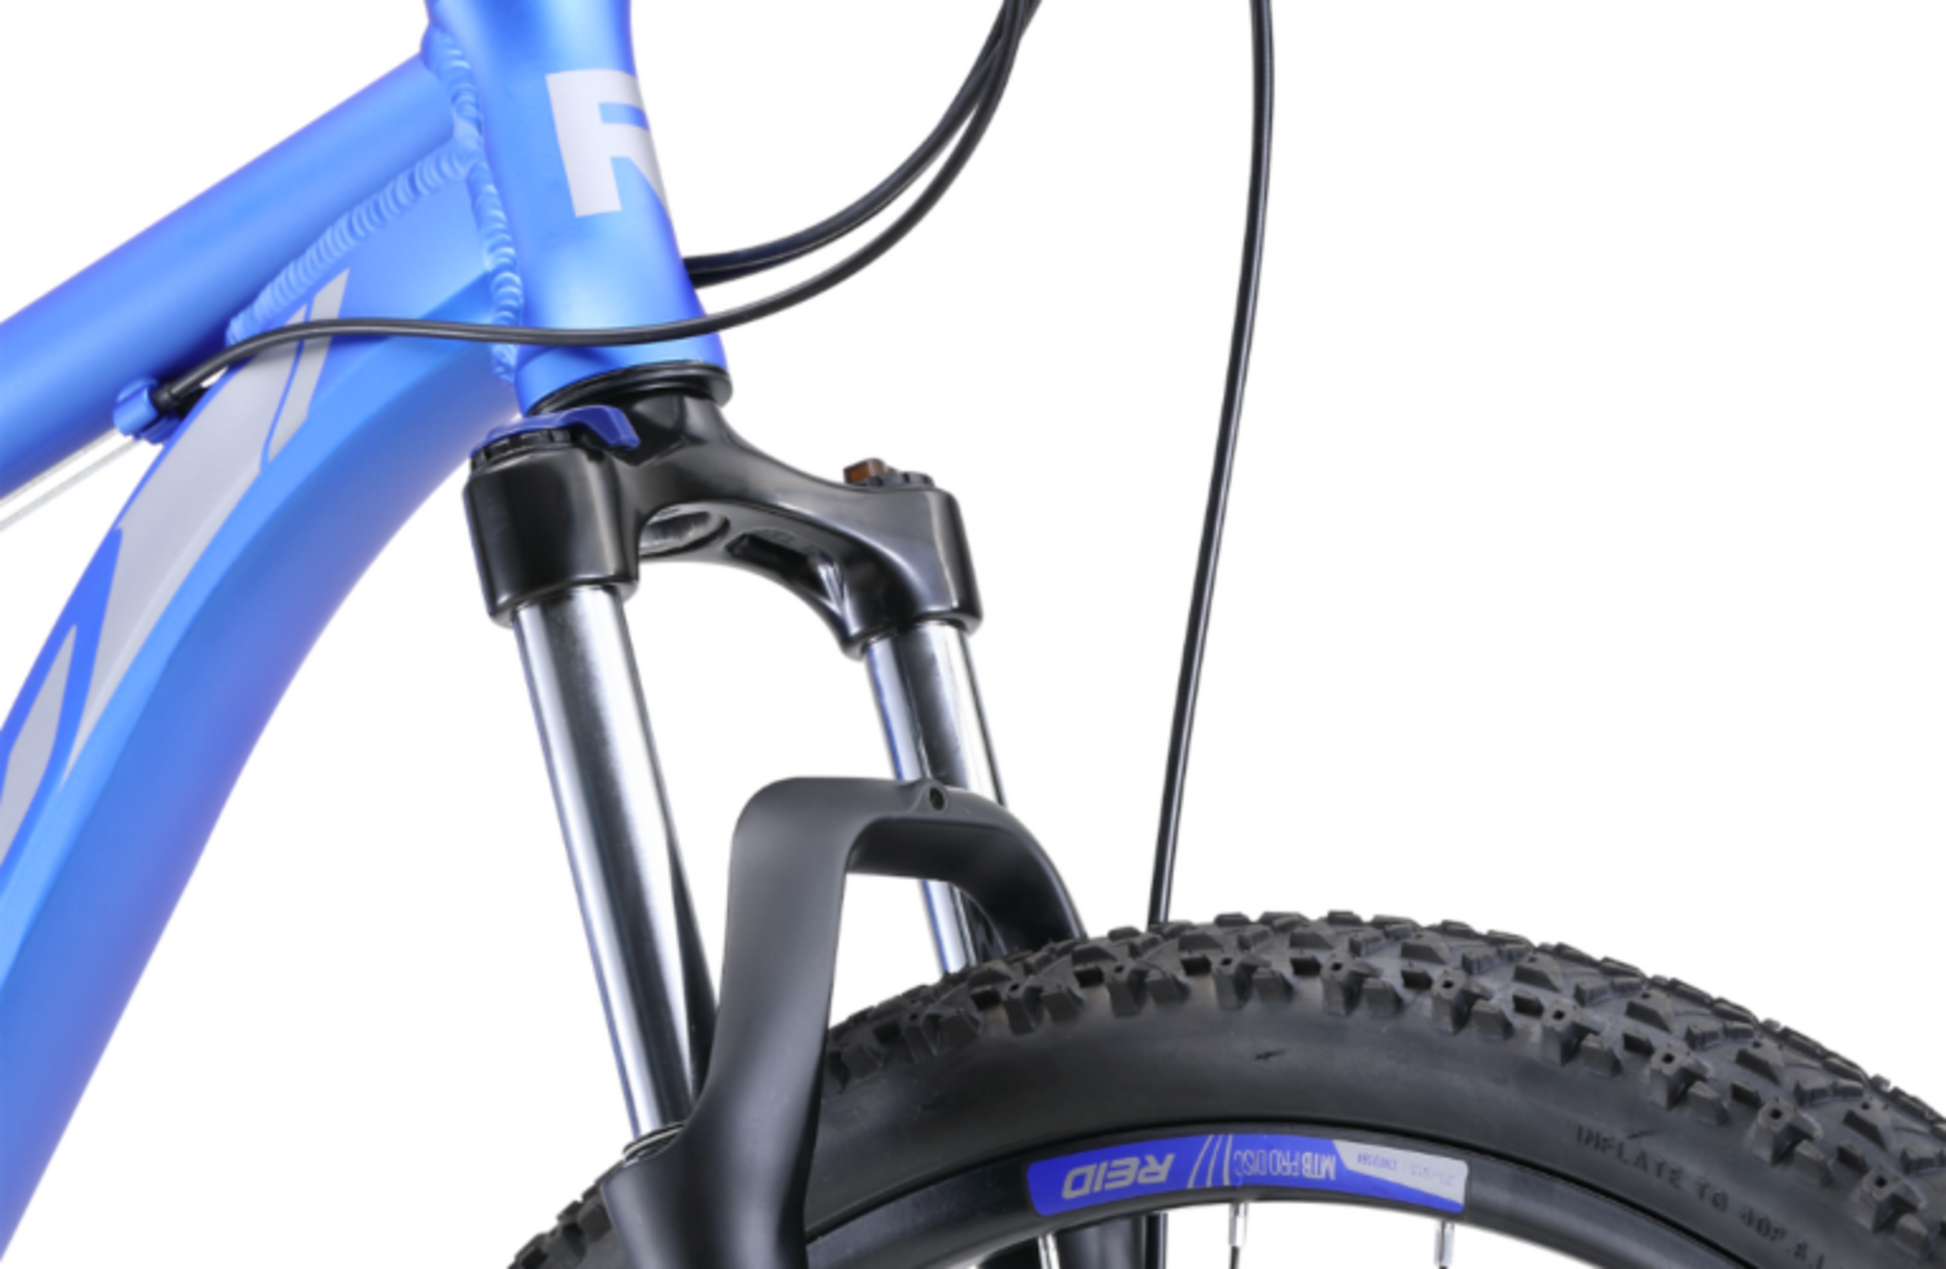 The MTB Pro 27.5" Disc Mountain Bike in Matte Blue showing suspension forks from Reid Cycles Australia